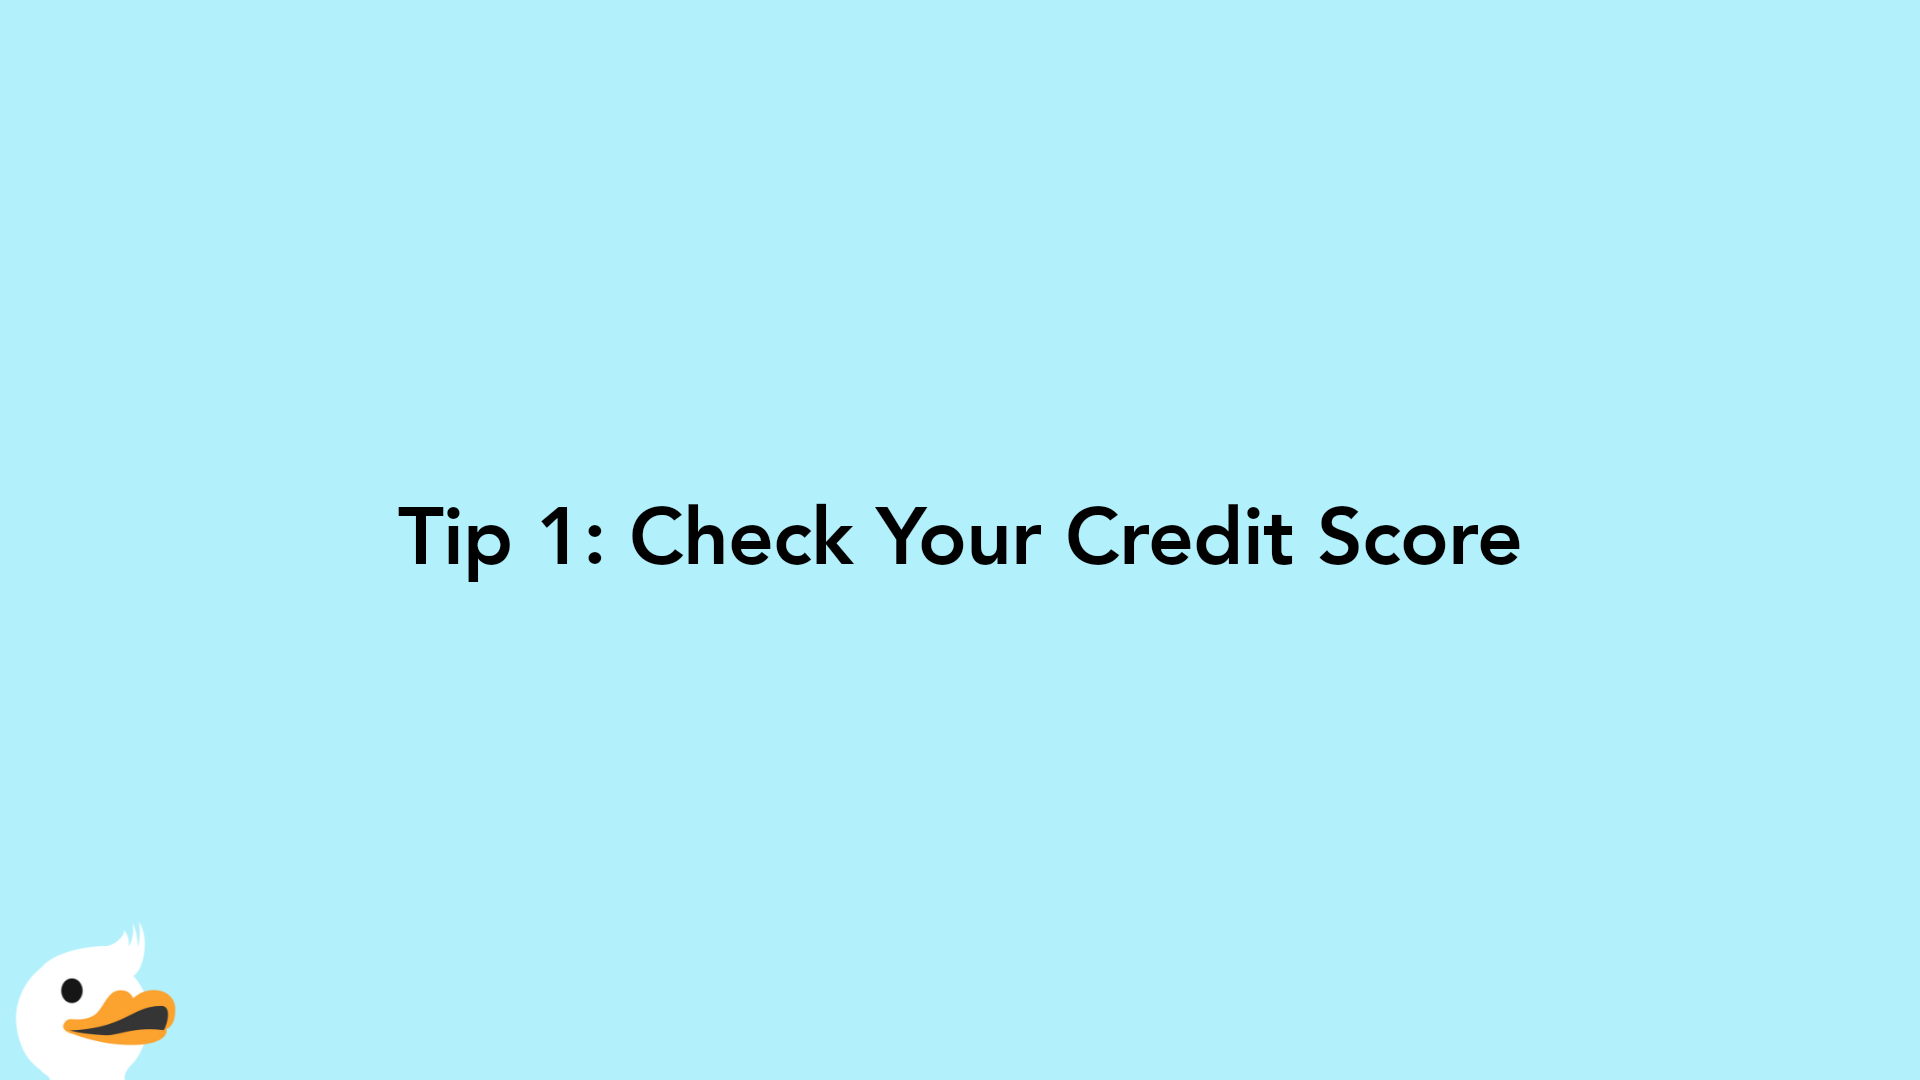 Tip 1: Check Your Credit Score